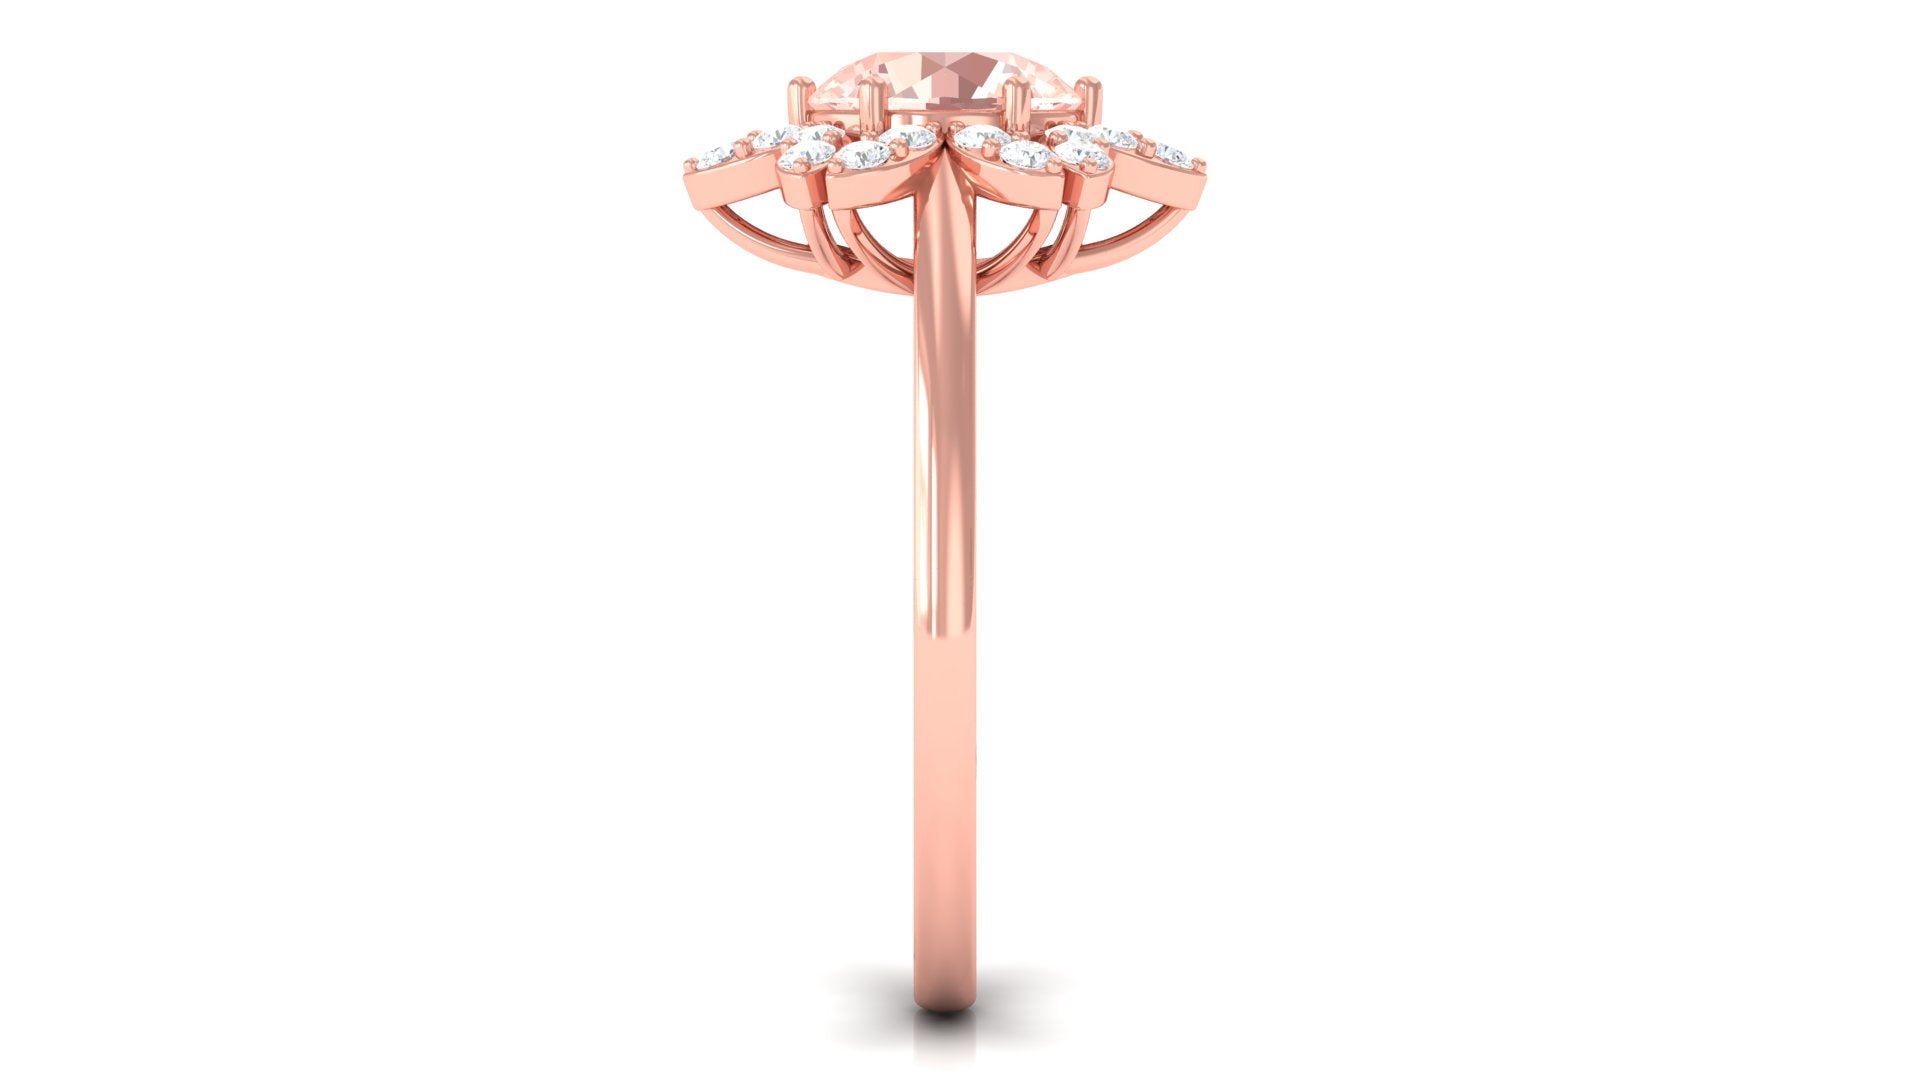 Rosec Jewels-Round Morganite Flower Engagement Ring with Diamond